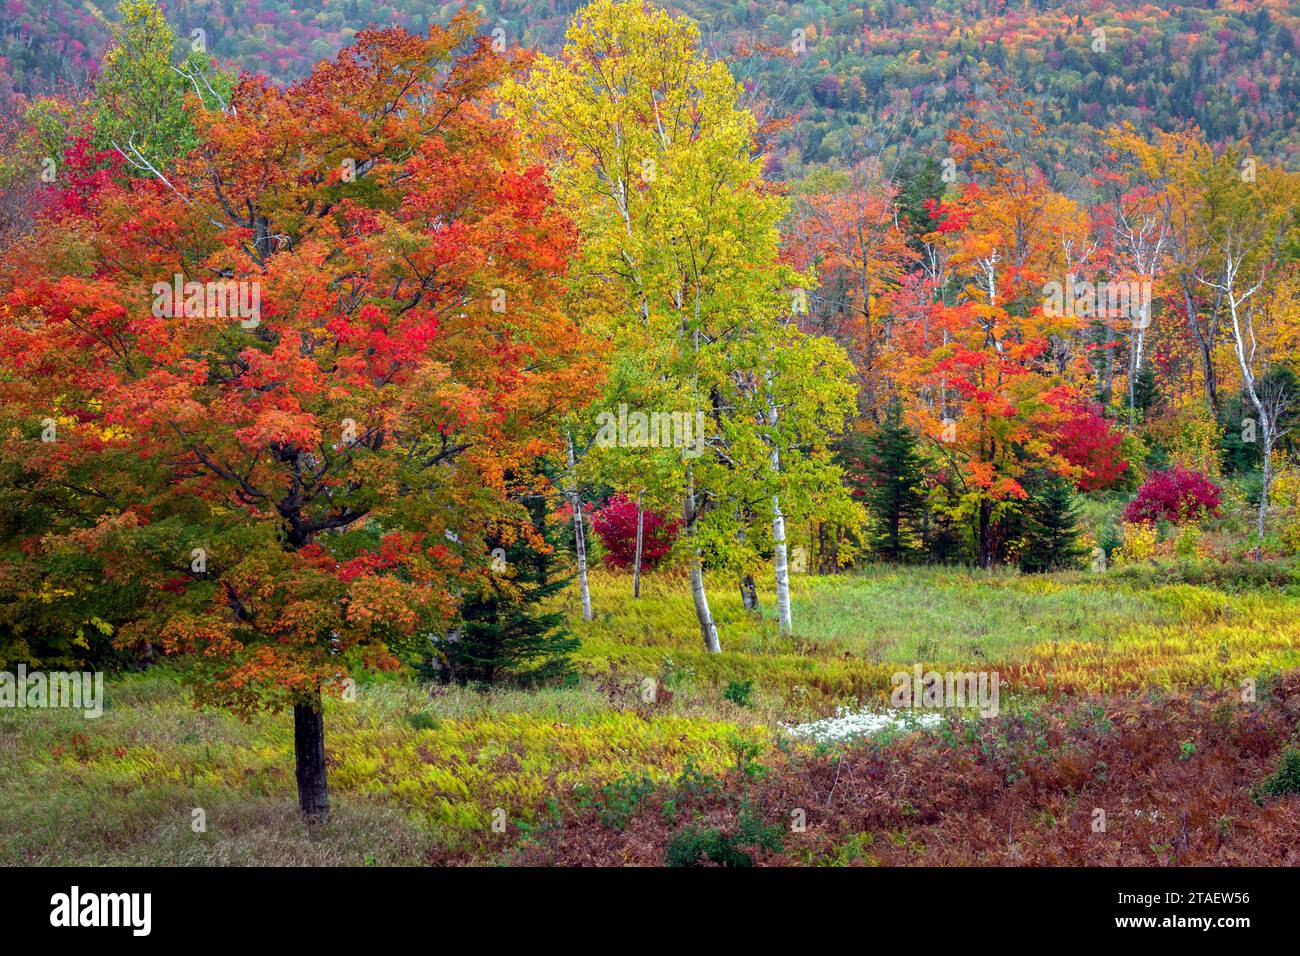 Nature's colors blend and dance as the seasons change in a New England mountain meadow. Stock Photo